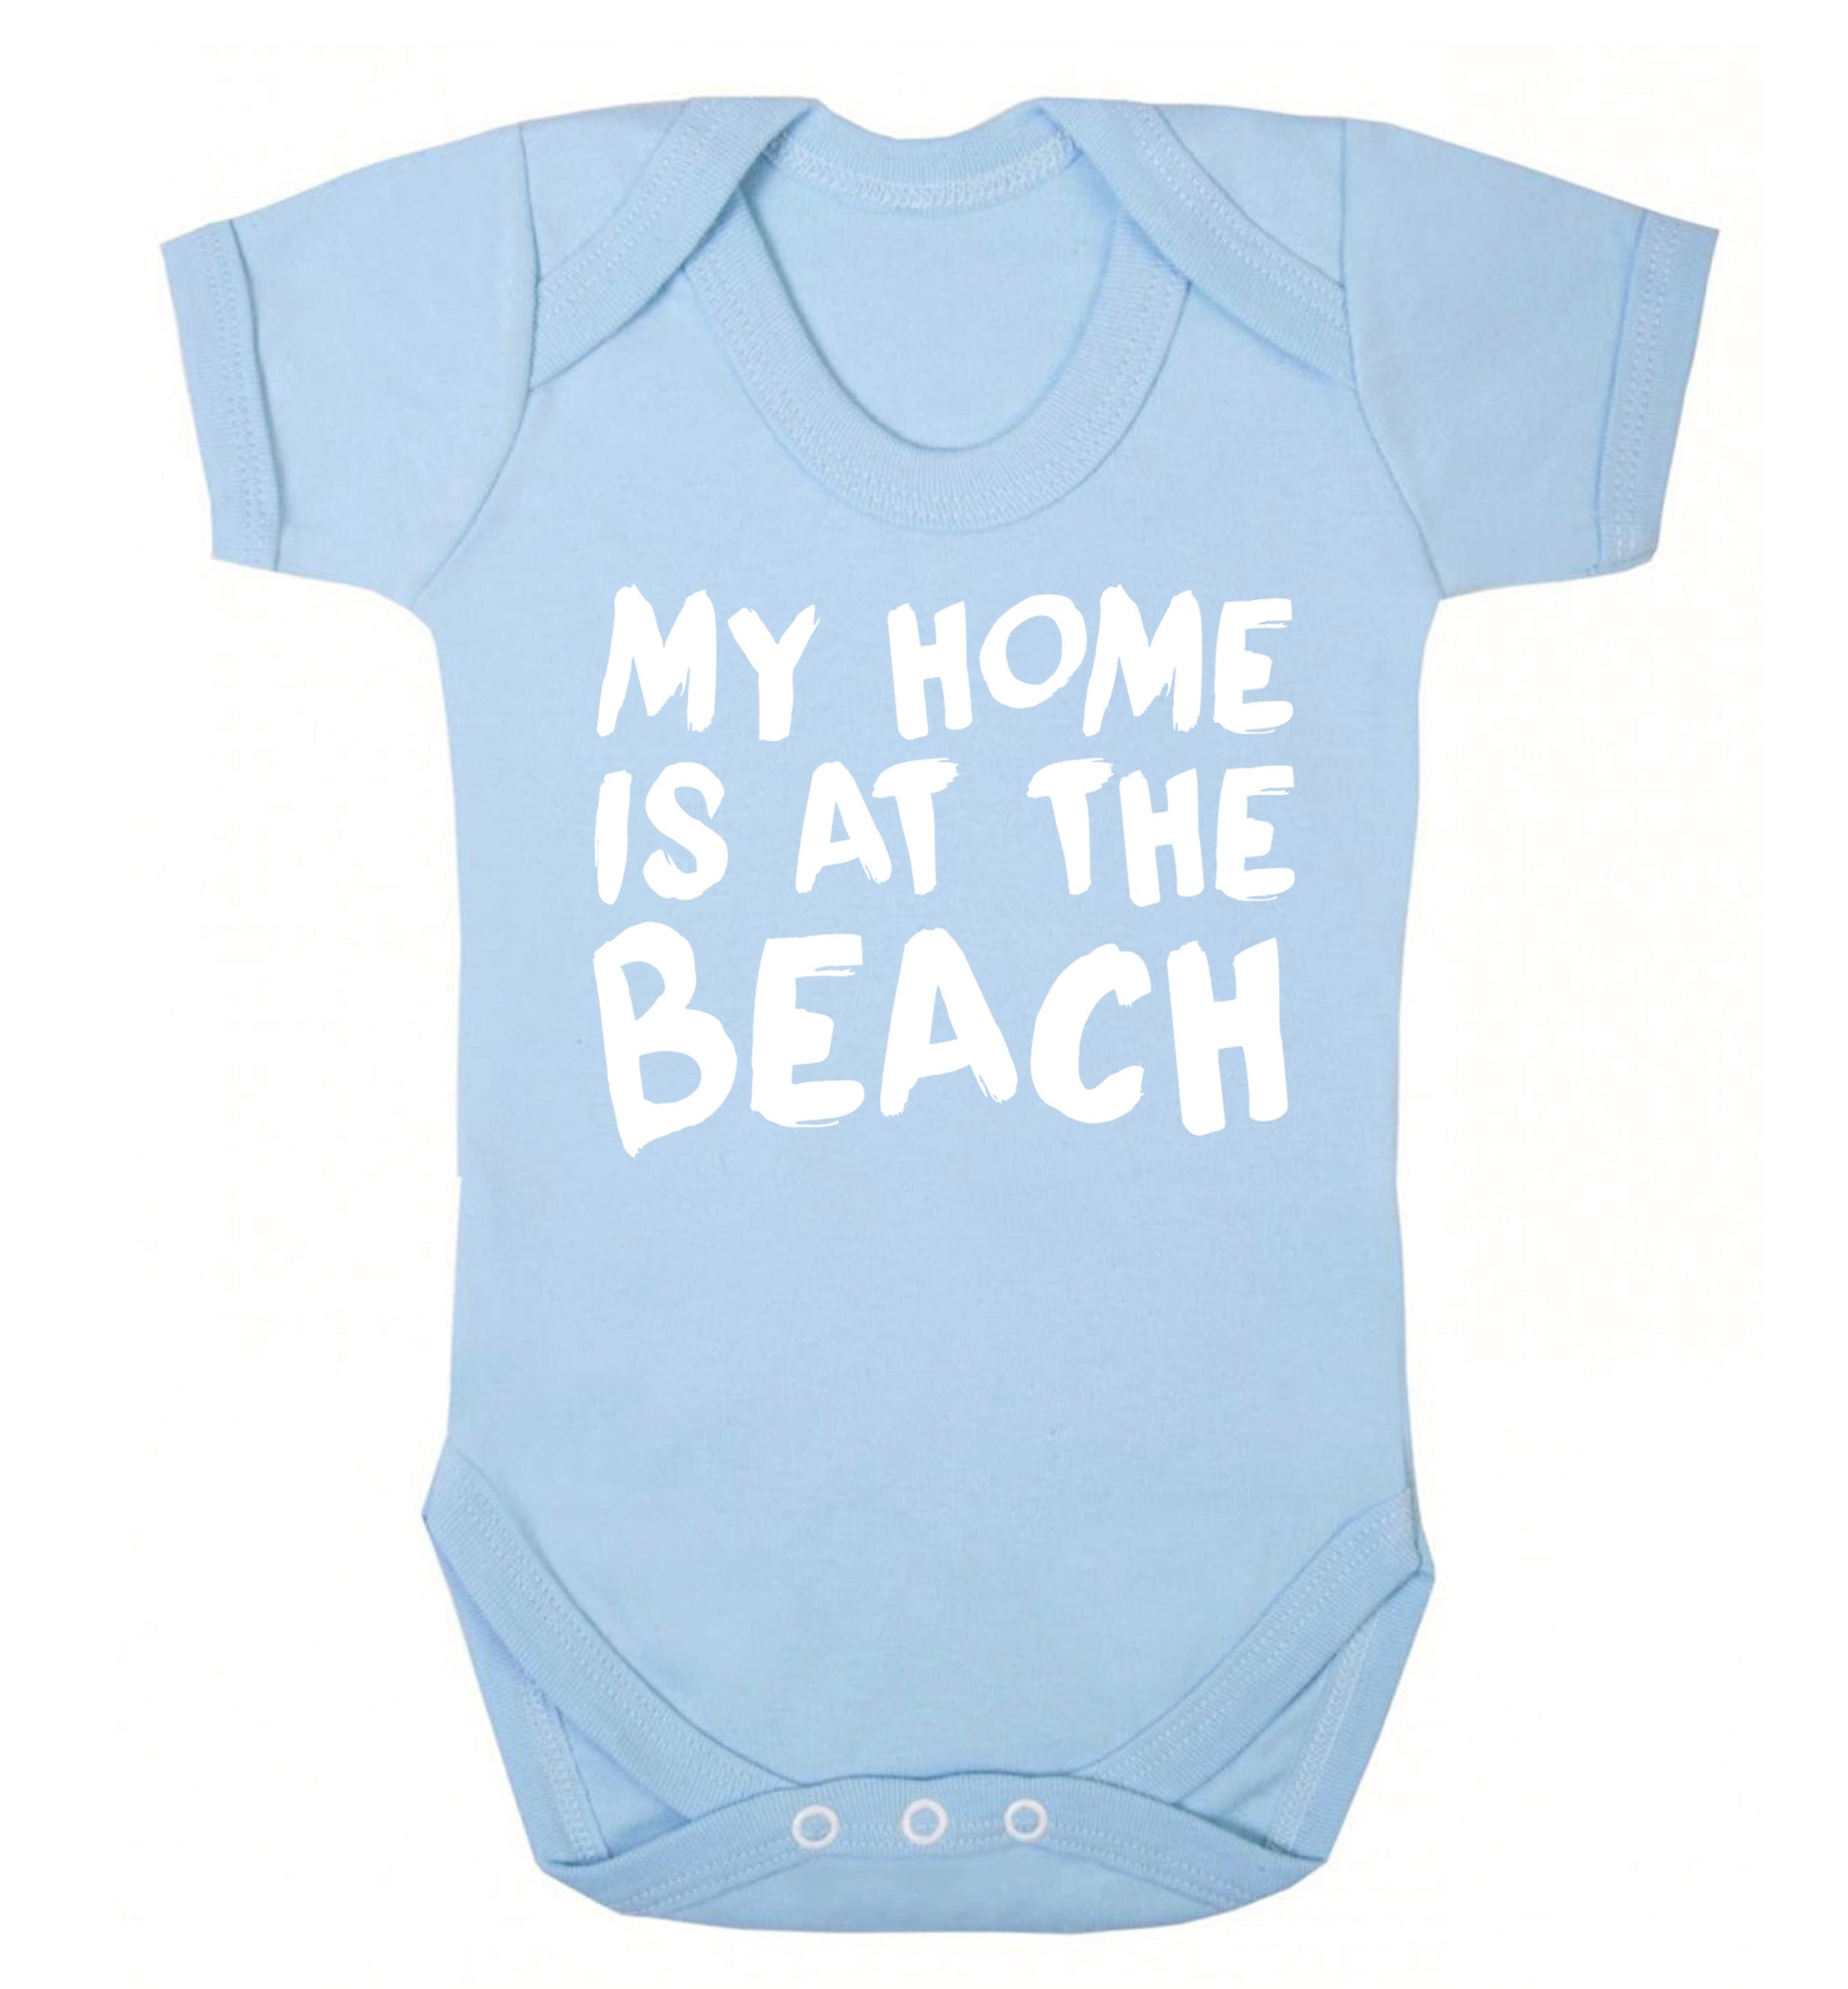 My home is at the beach Baby Vest pale blue 18-24 months